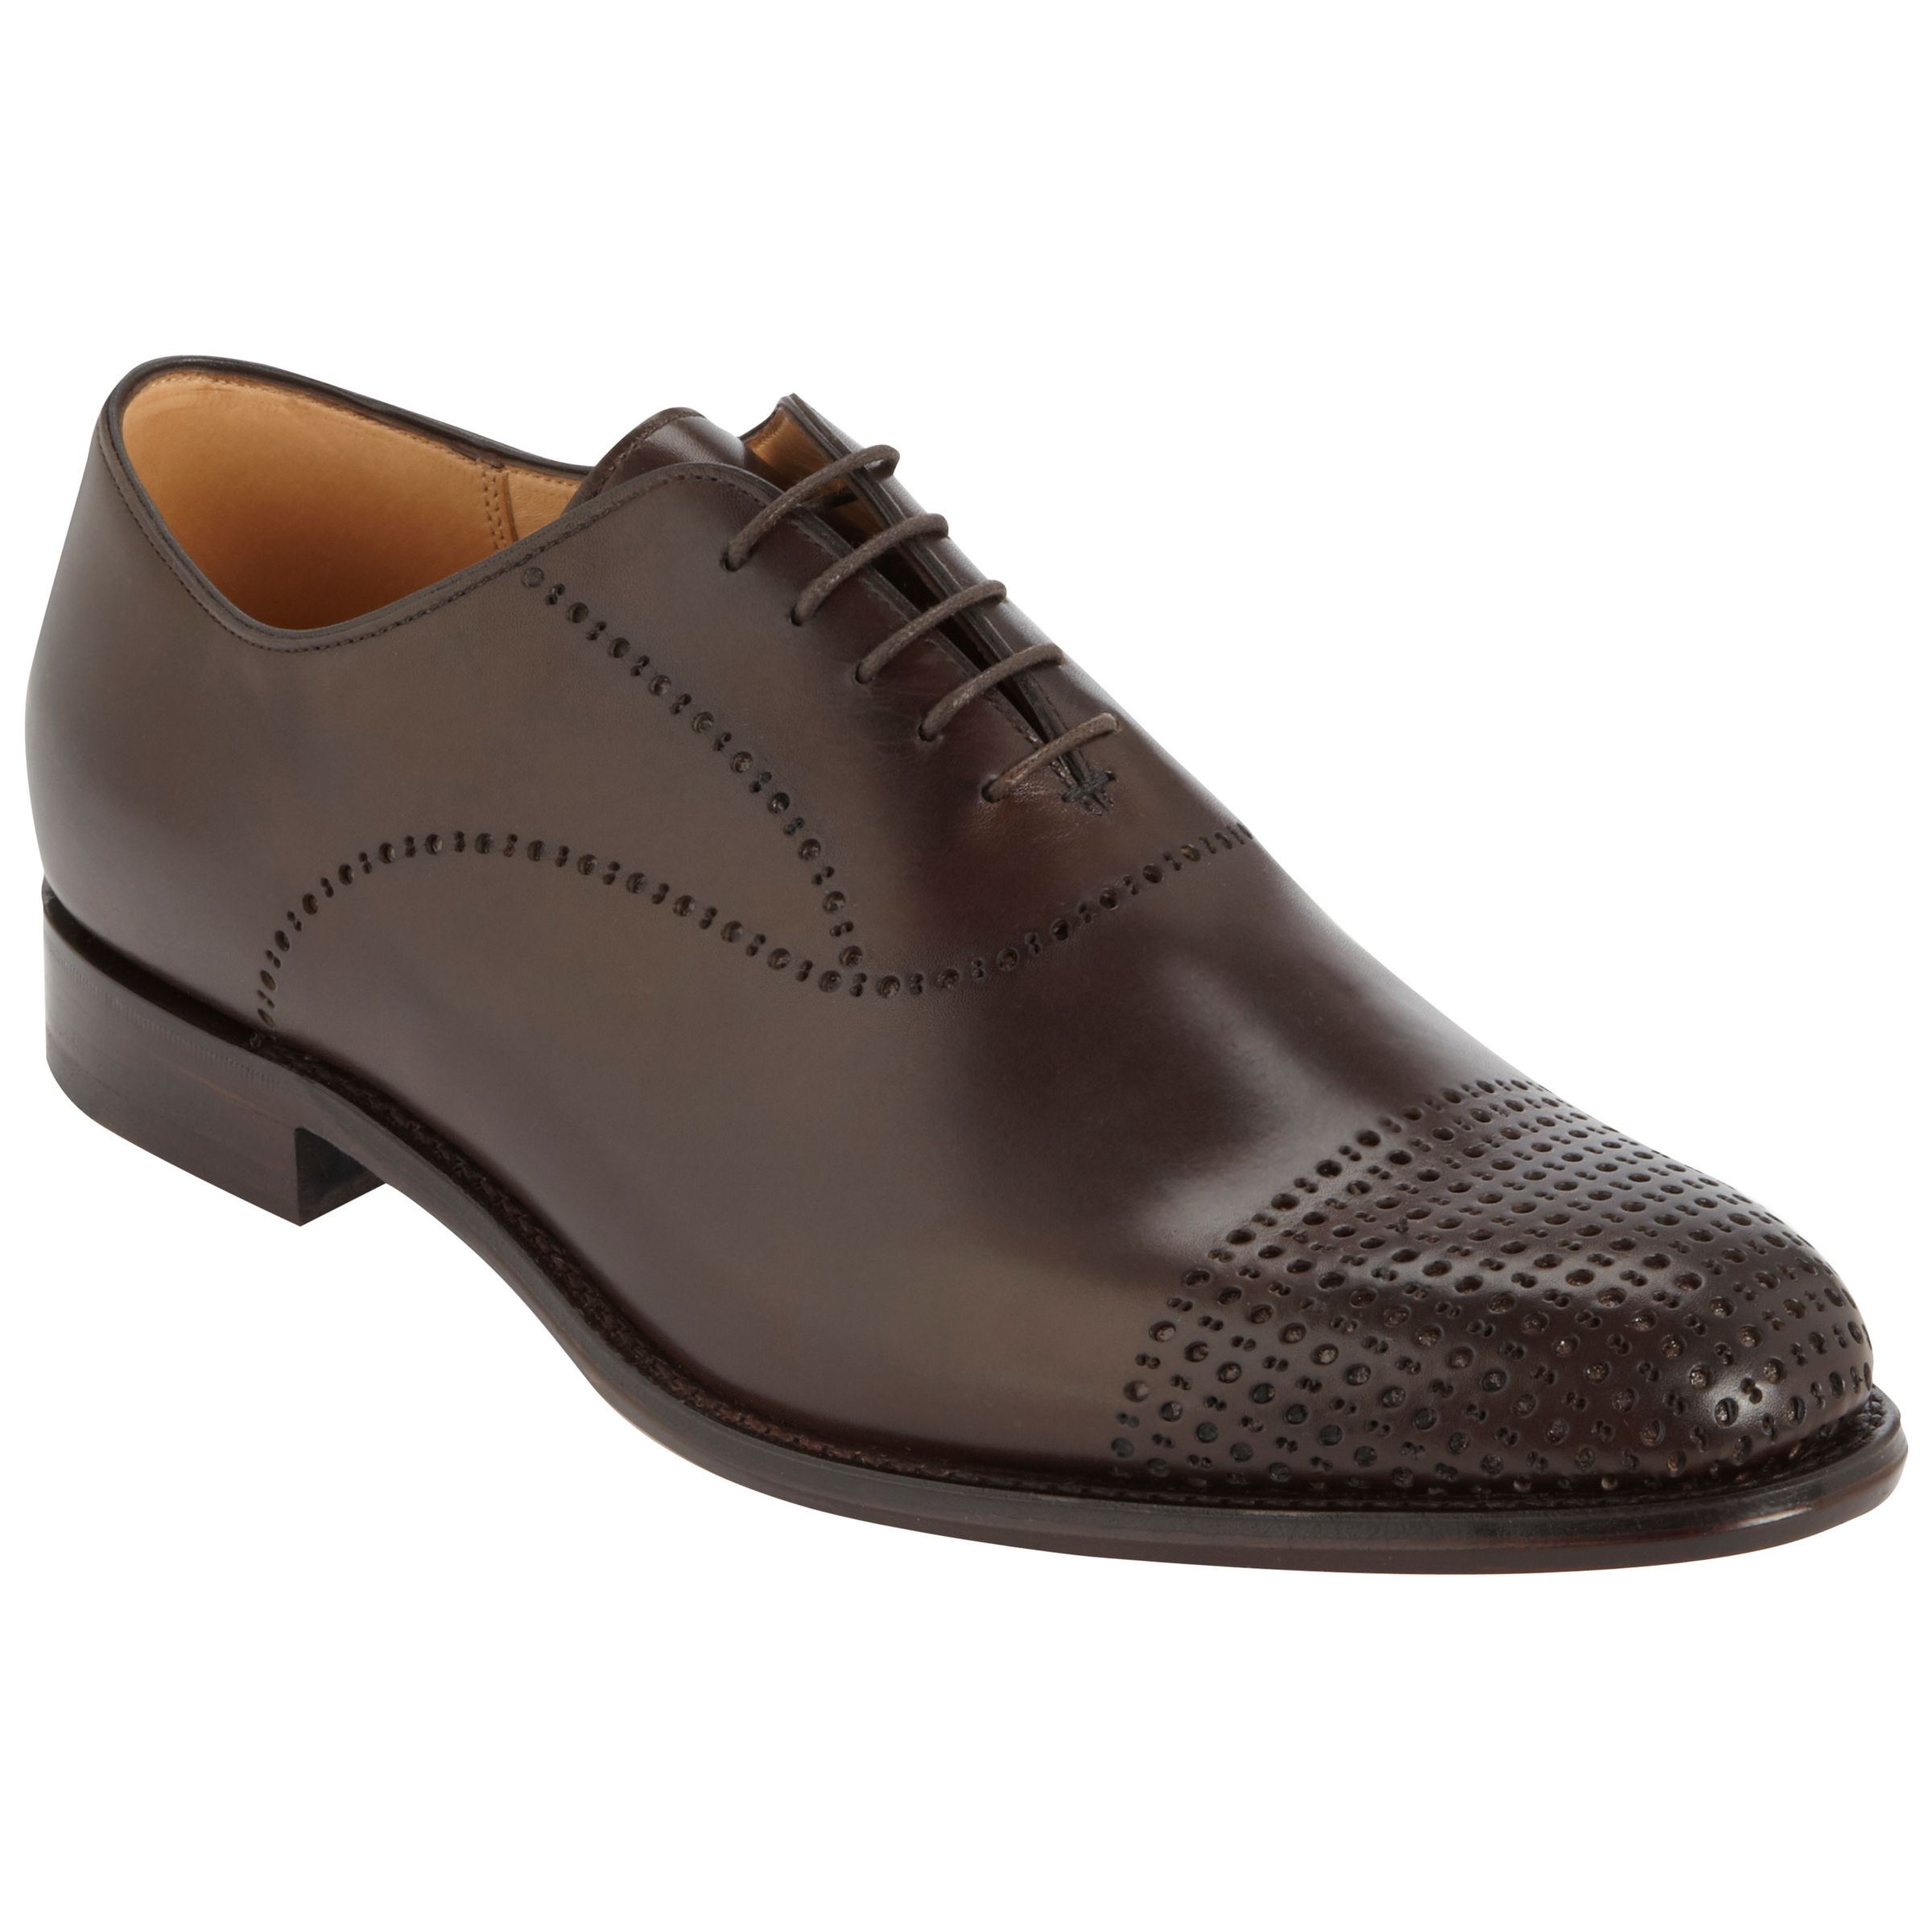 Joe Casely-Hayford for John Lewis Mentor Punched Oxford Shoes, Brown at John Lewis